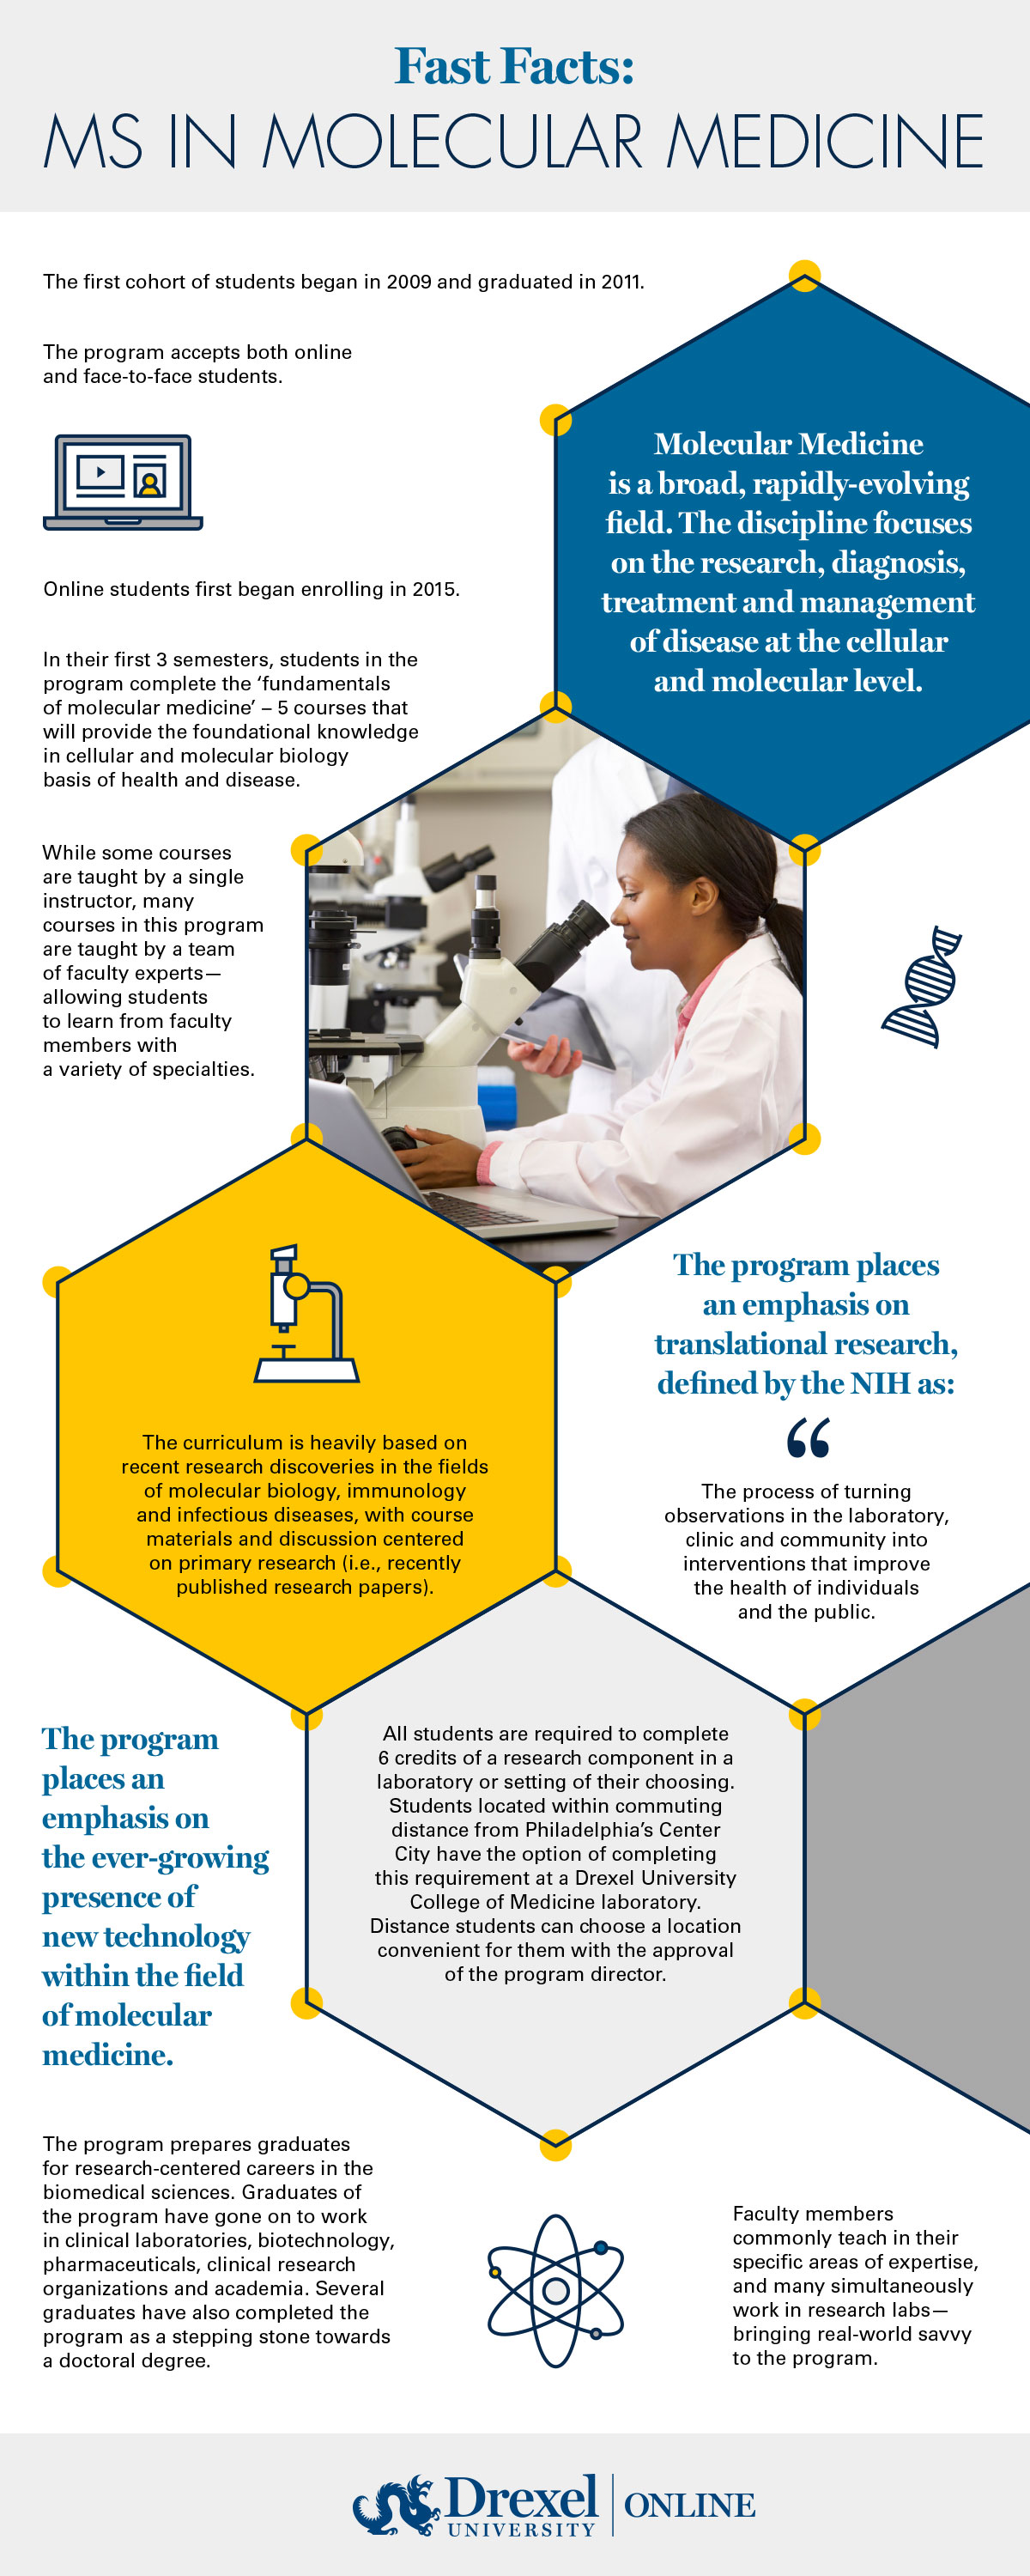 MS in Molecular Medicine Fast Facts Infographic